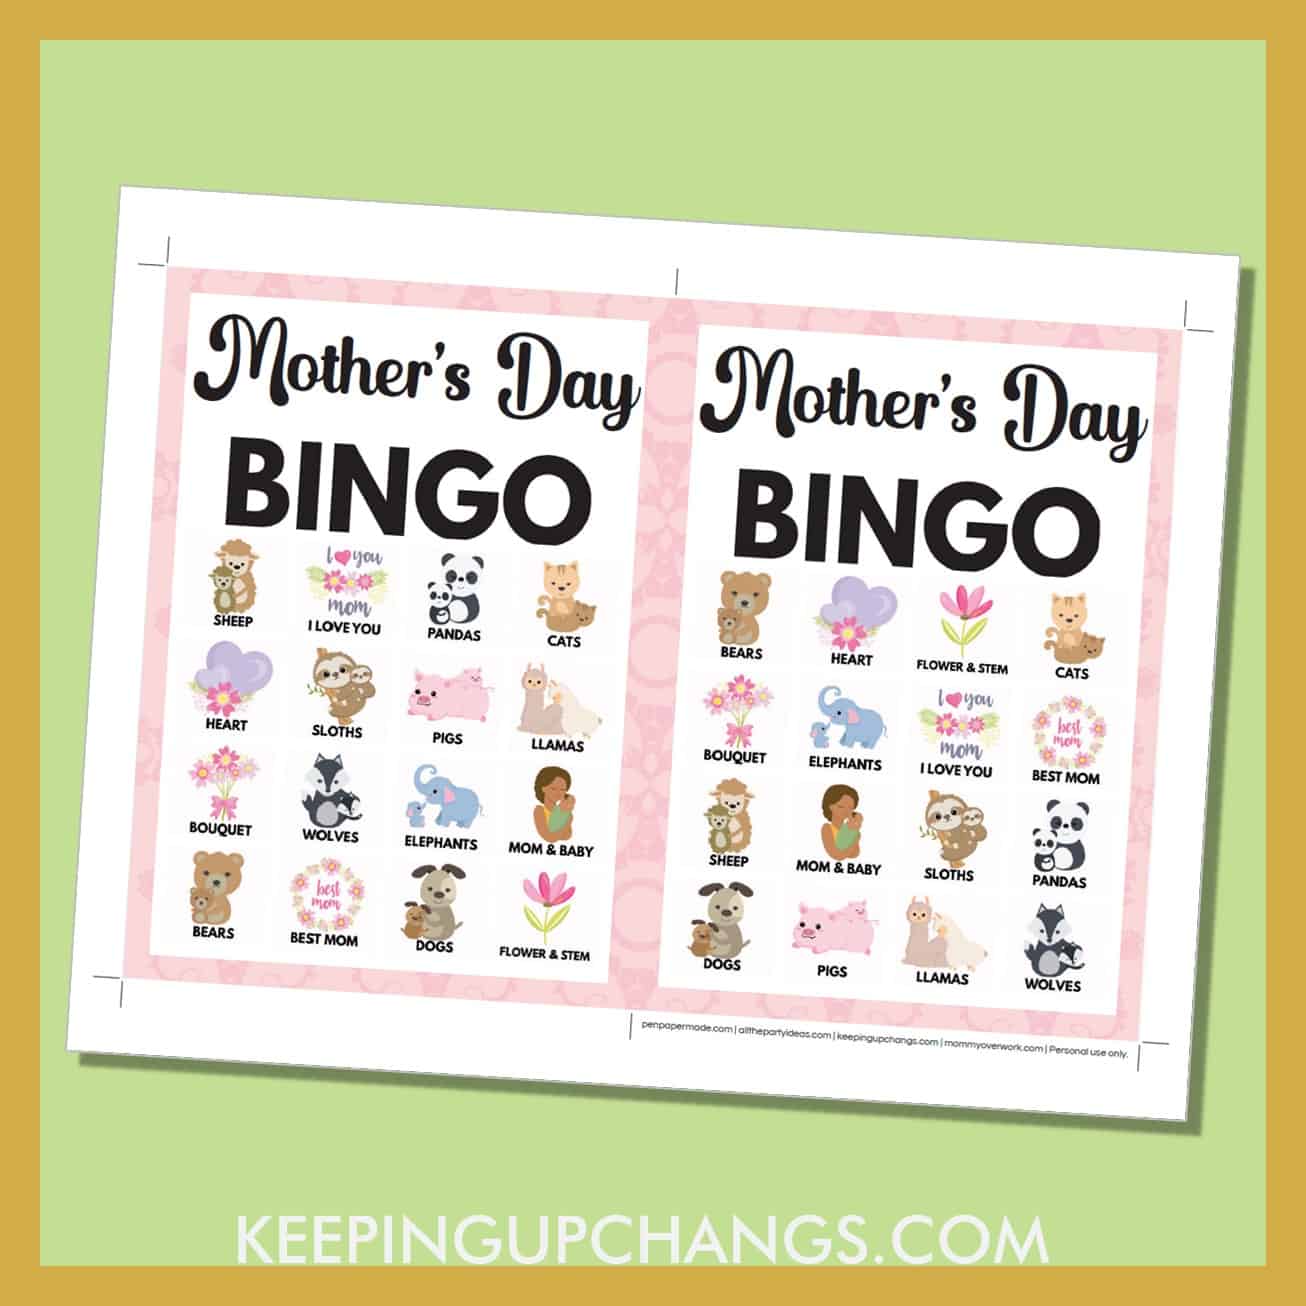 free mother's day bingo card 4x4 5x7 game boards with images and text words.